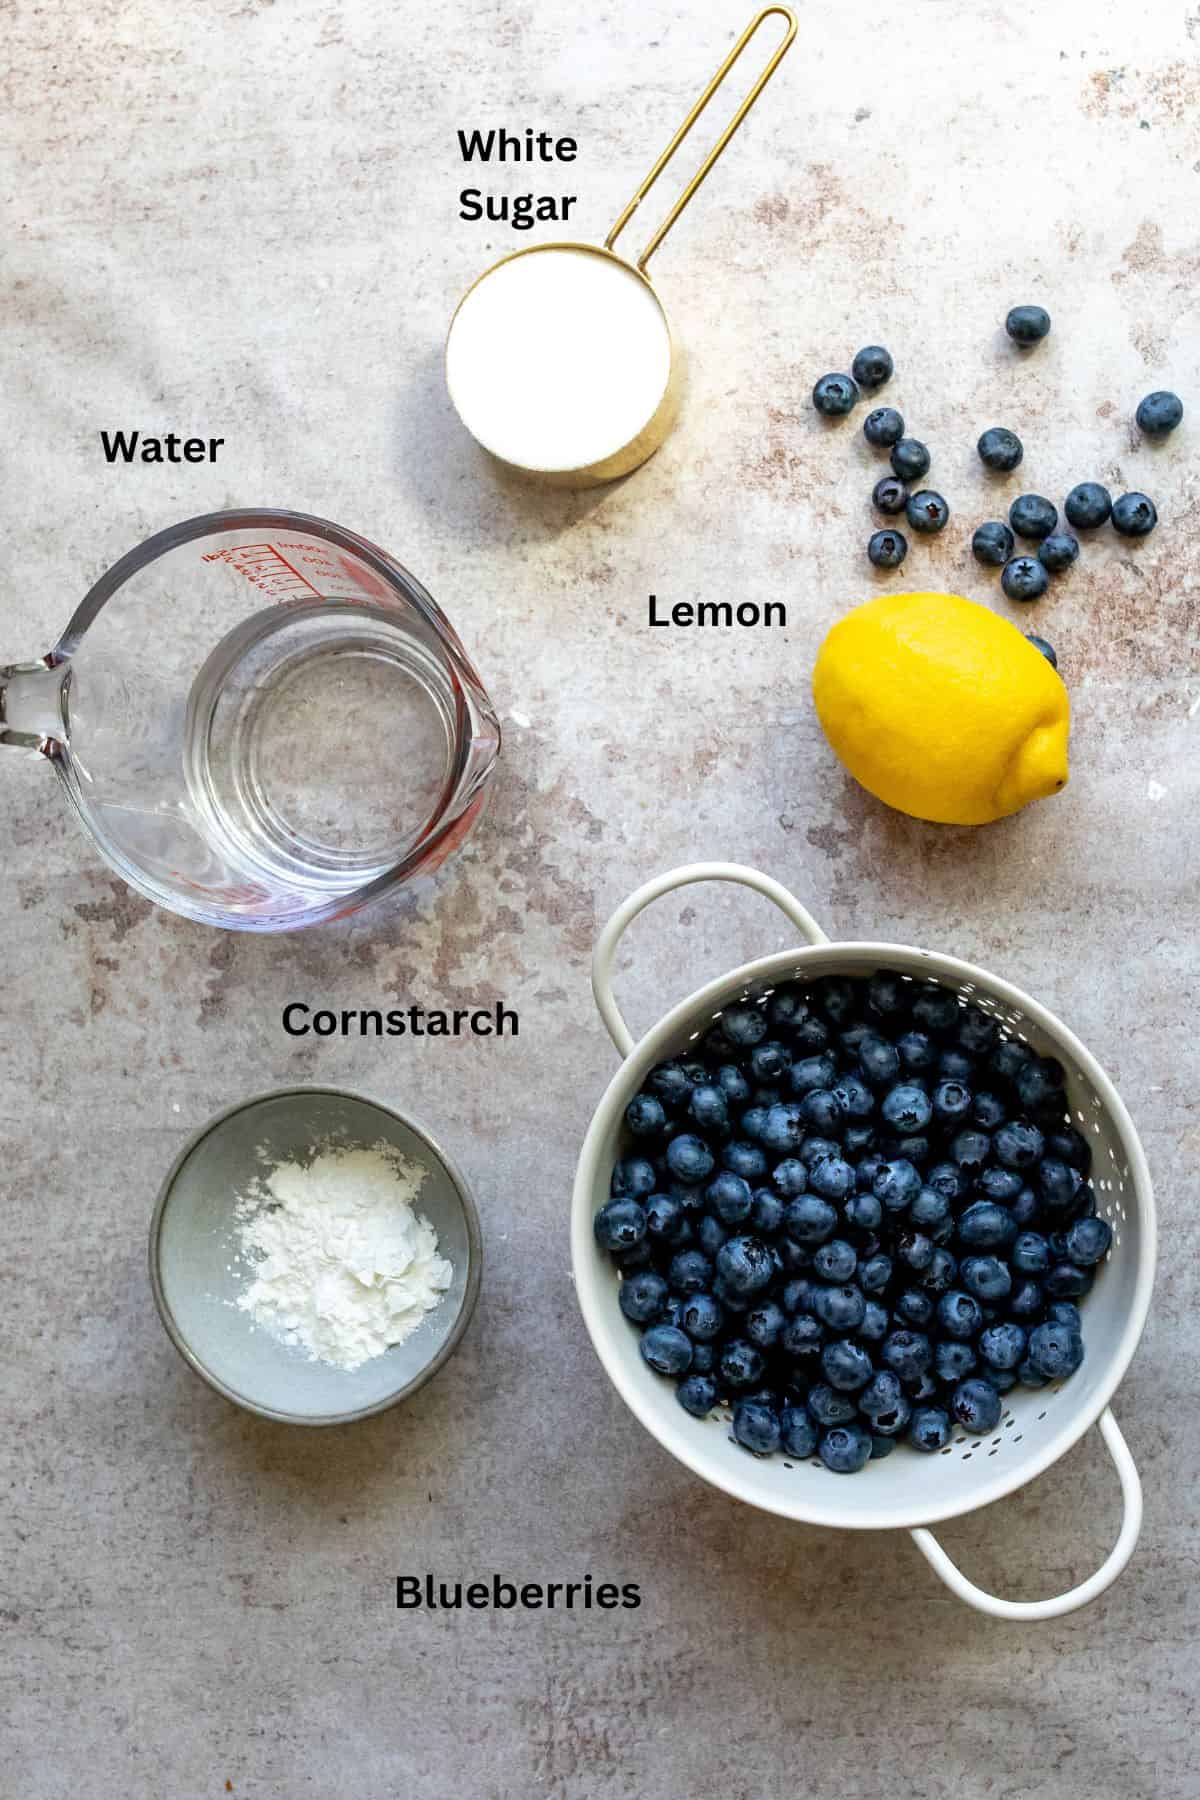 An image of the ingredients of blueberry syrup.